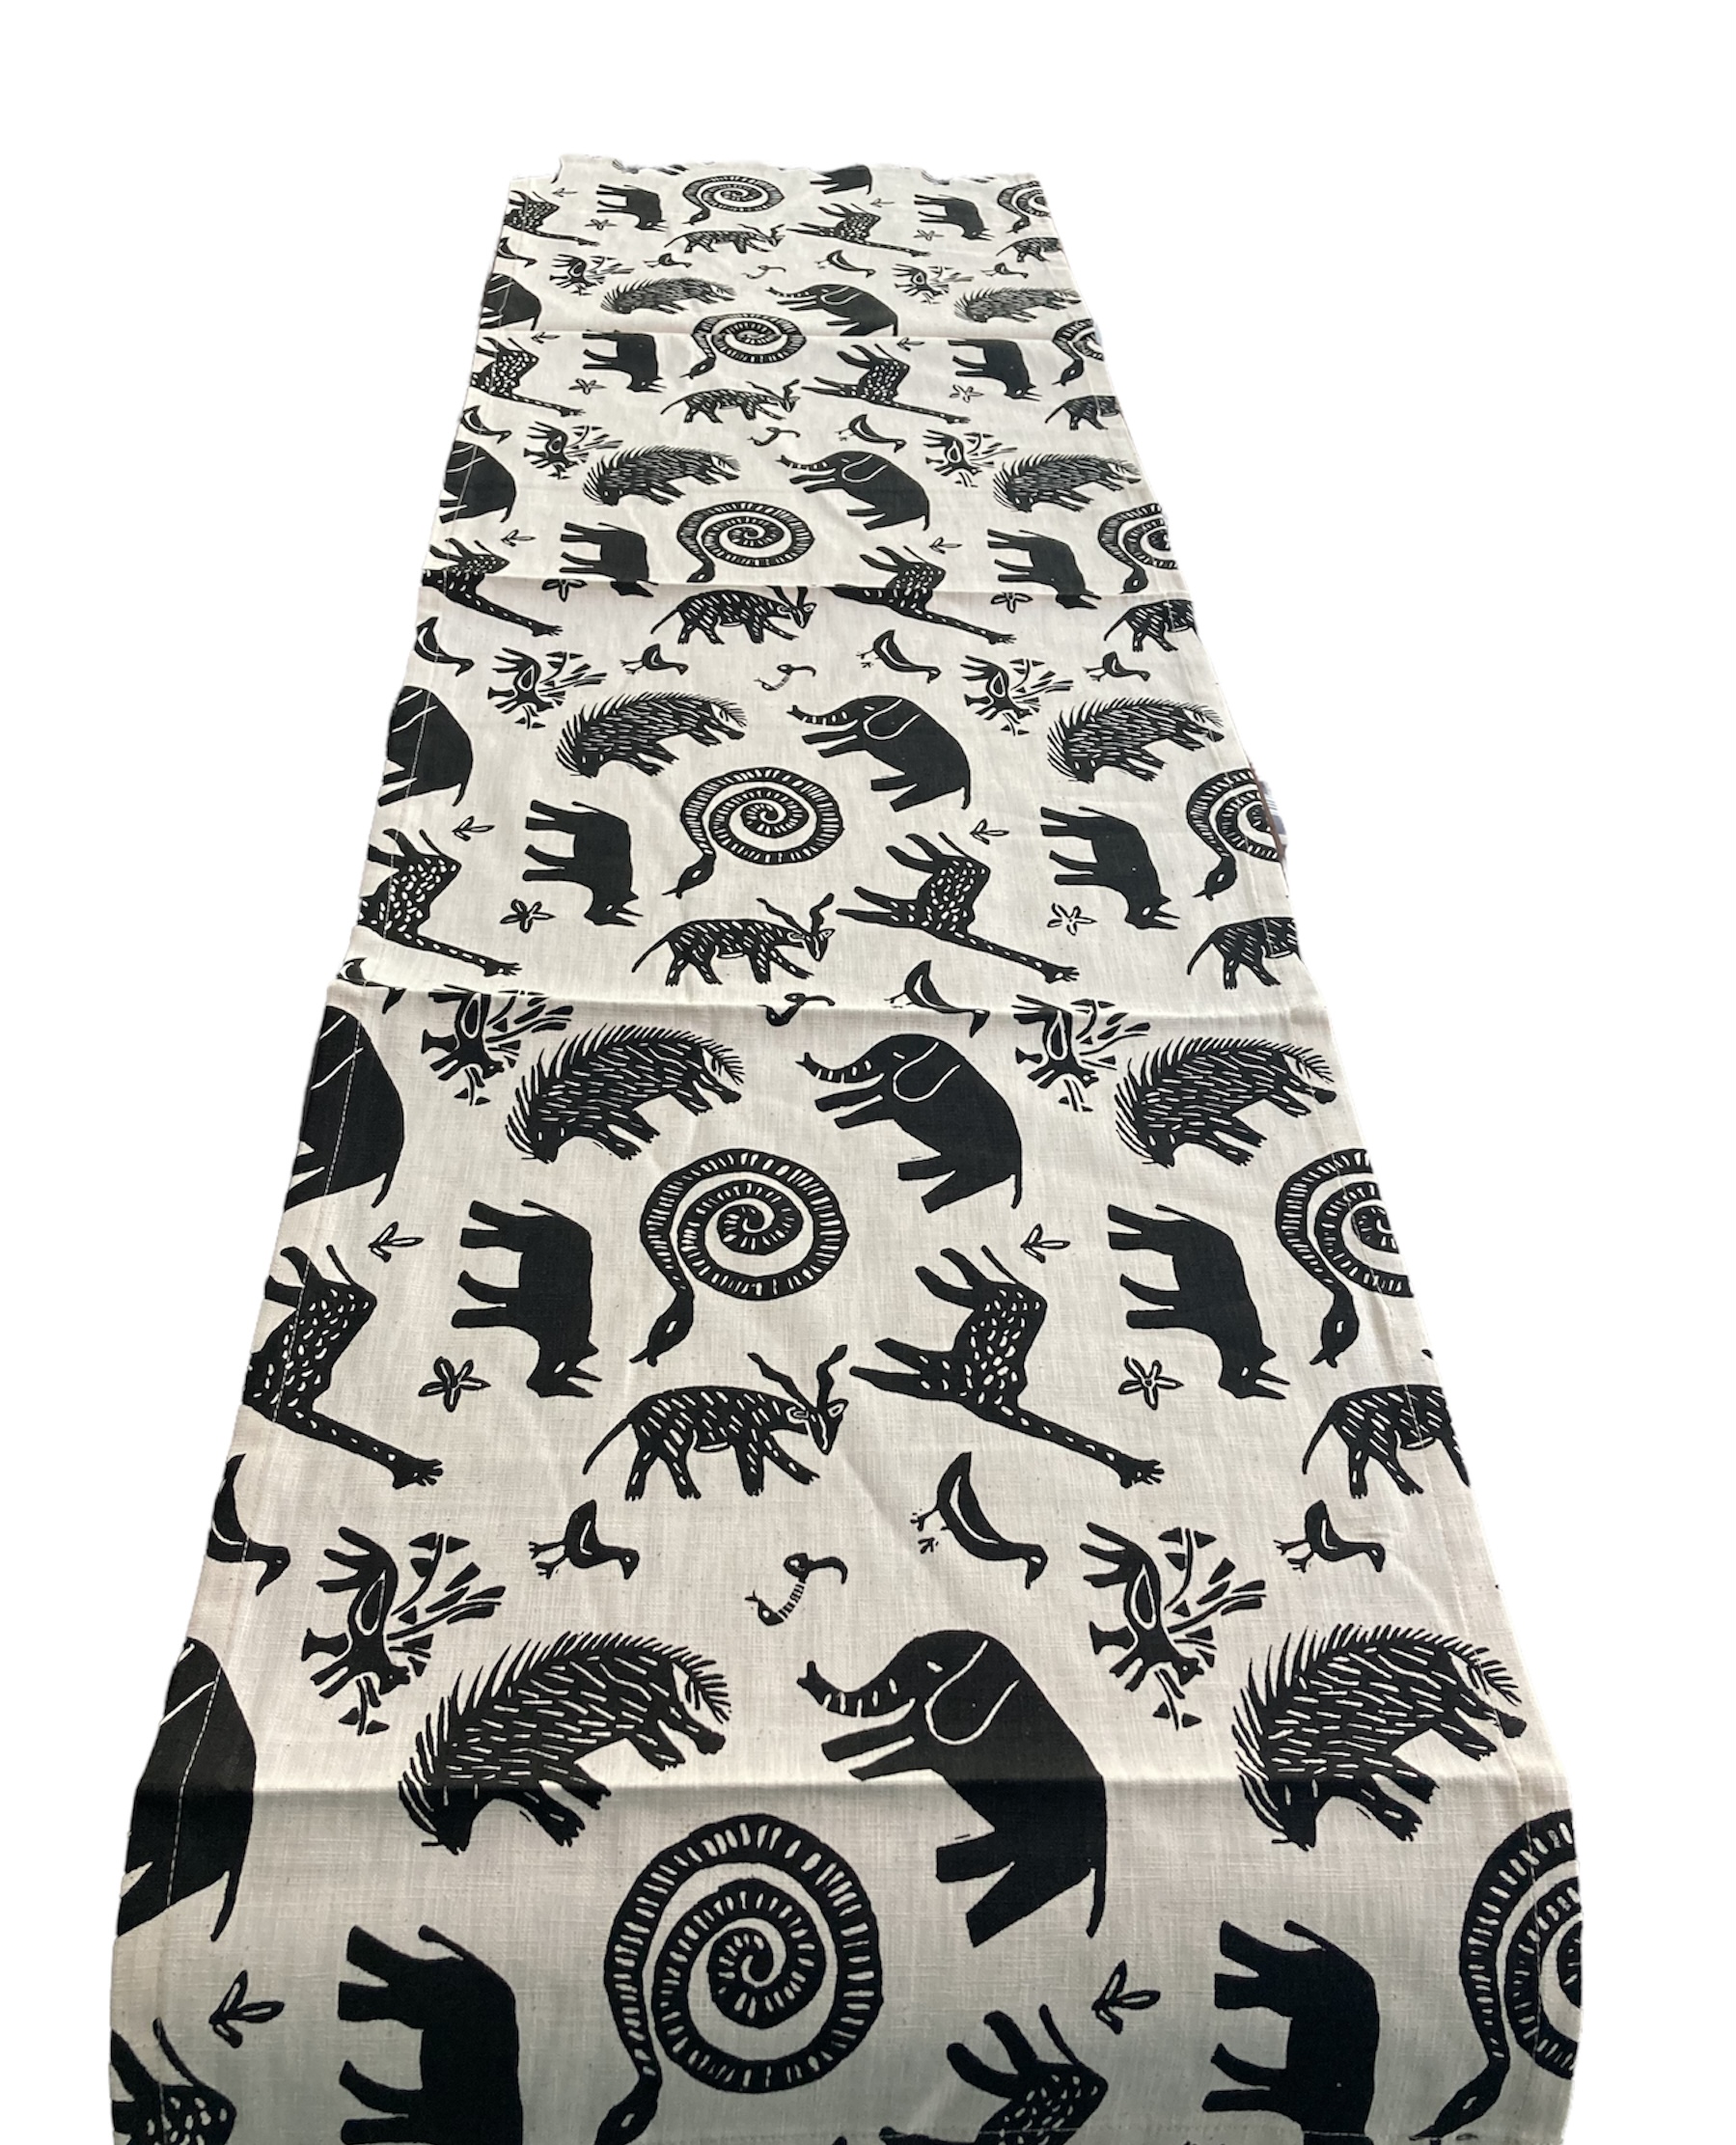 100% cotton Table Runner 96" x 16" from Namibia - Design bw03l